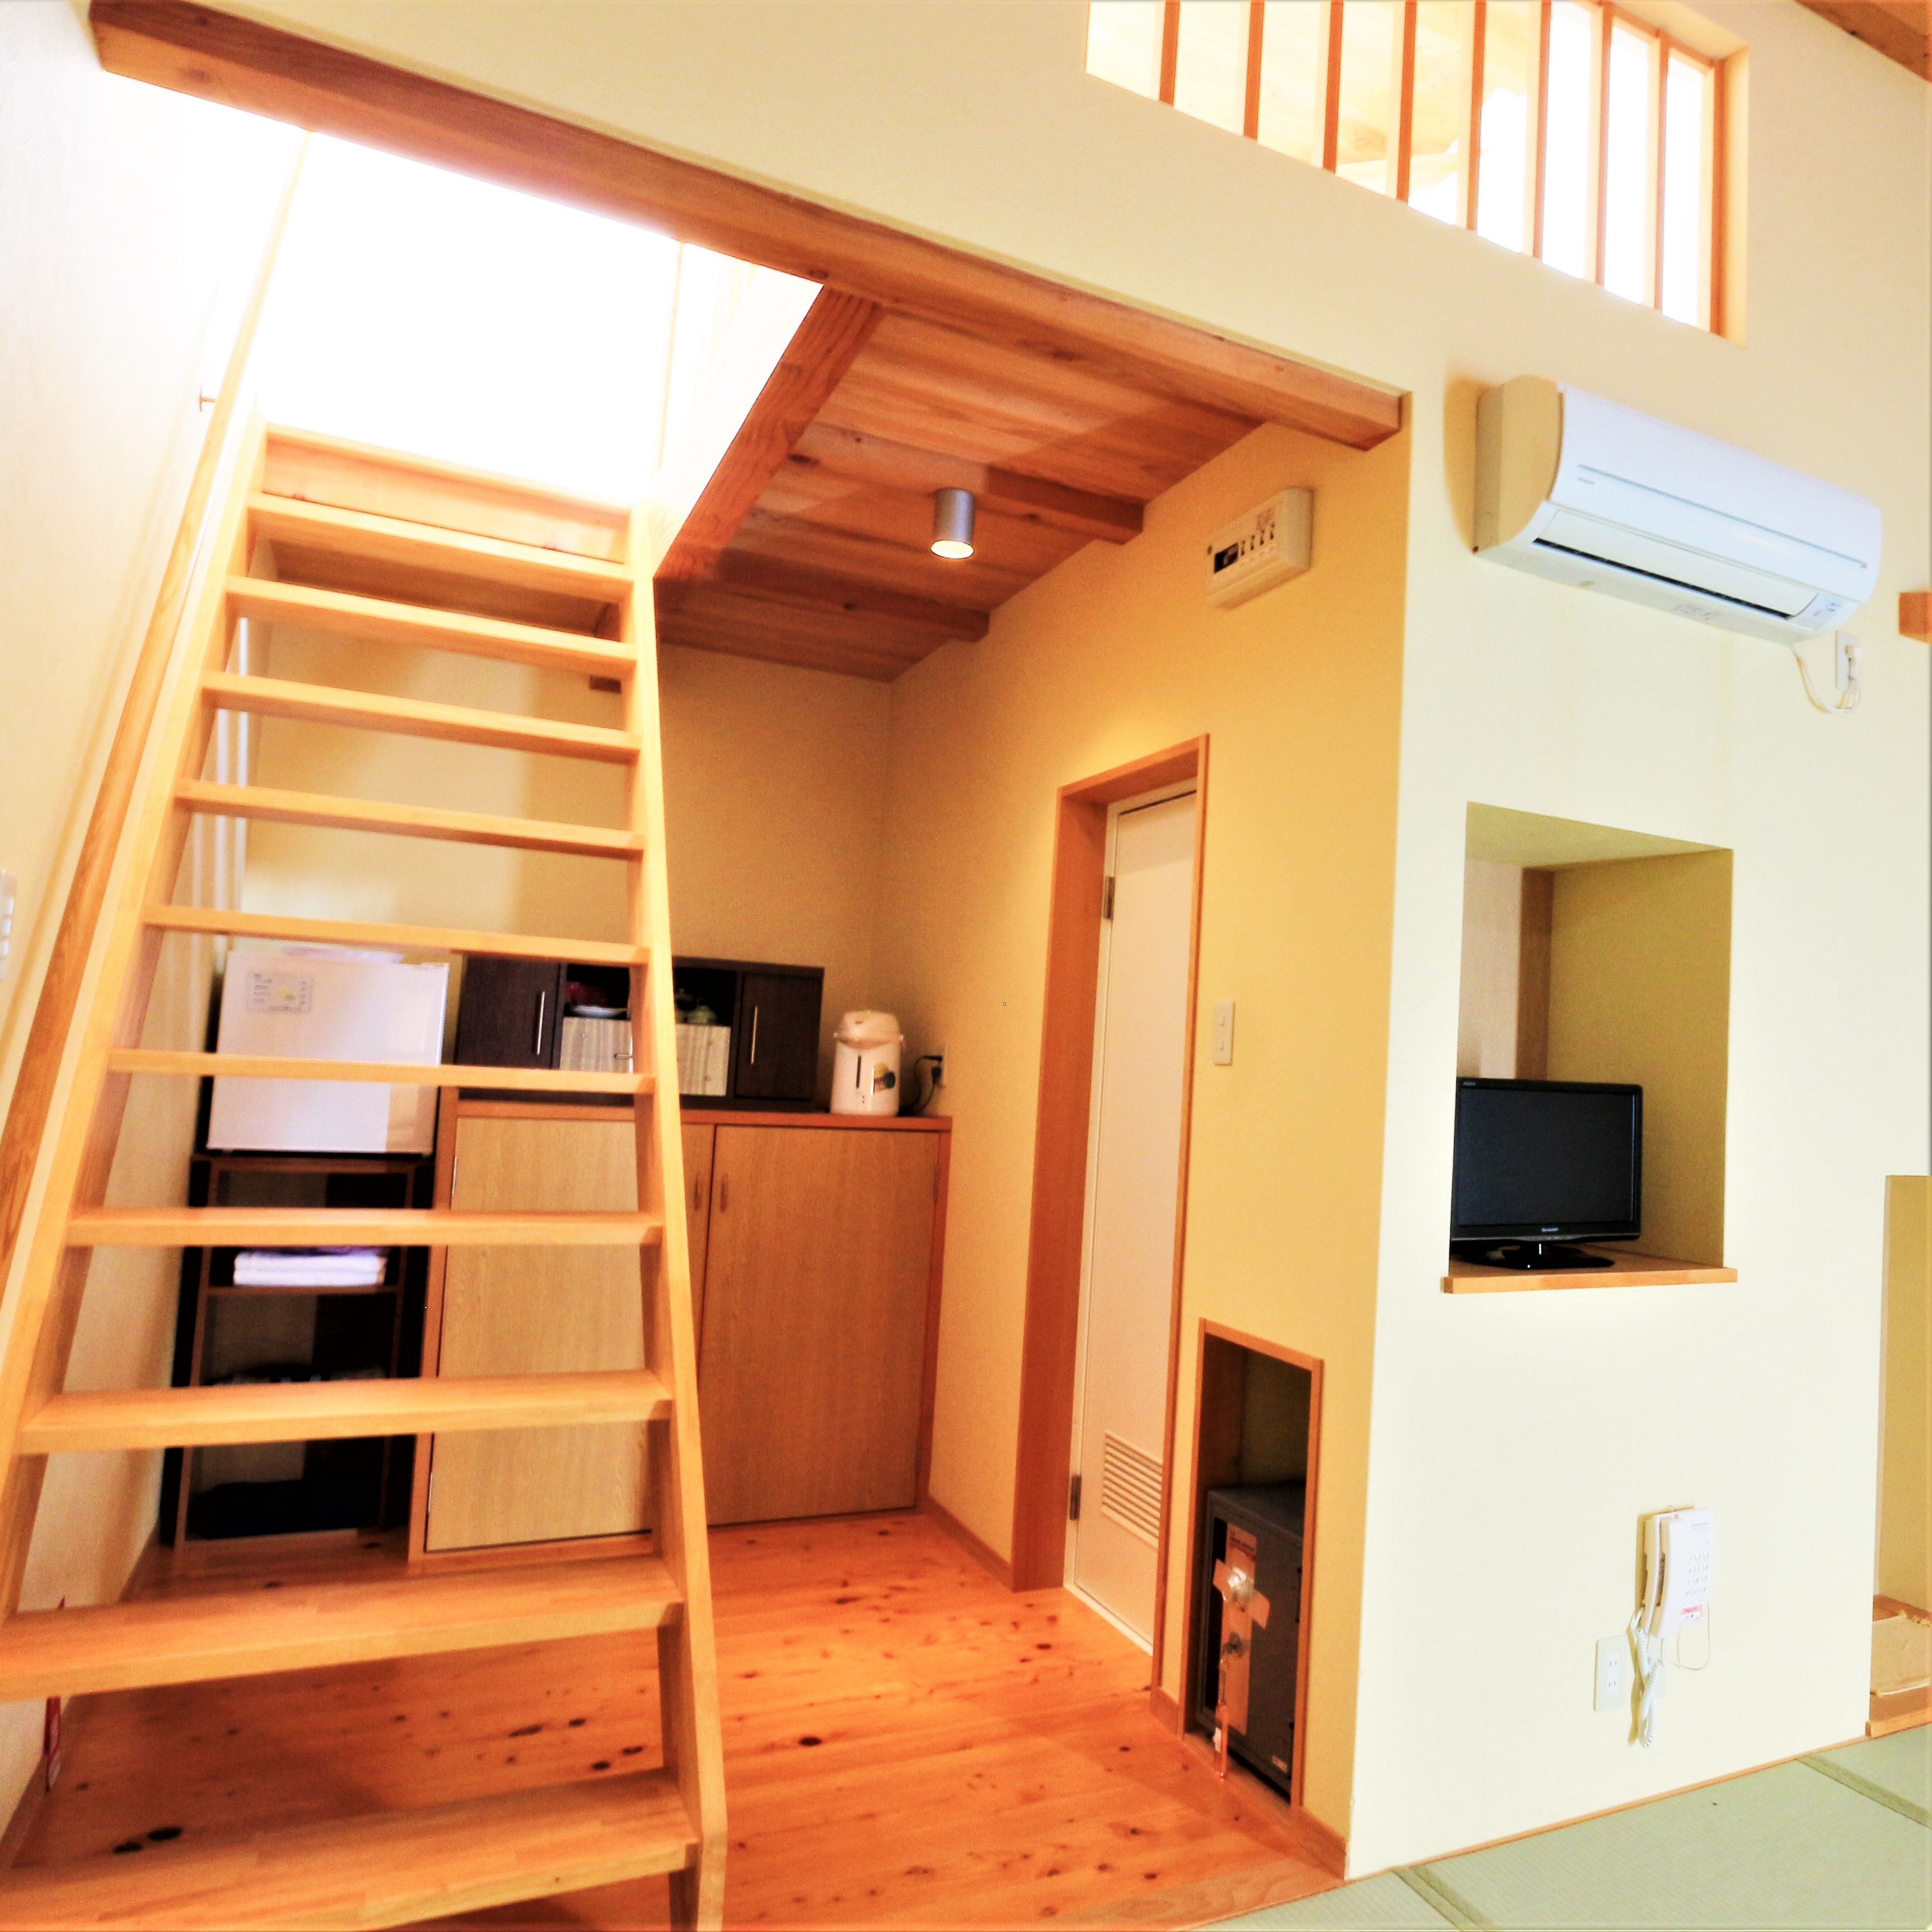 [Away from the annex] Loft stairs & bath / toilet